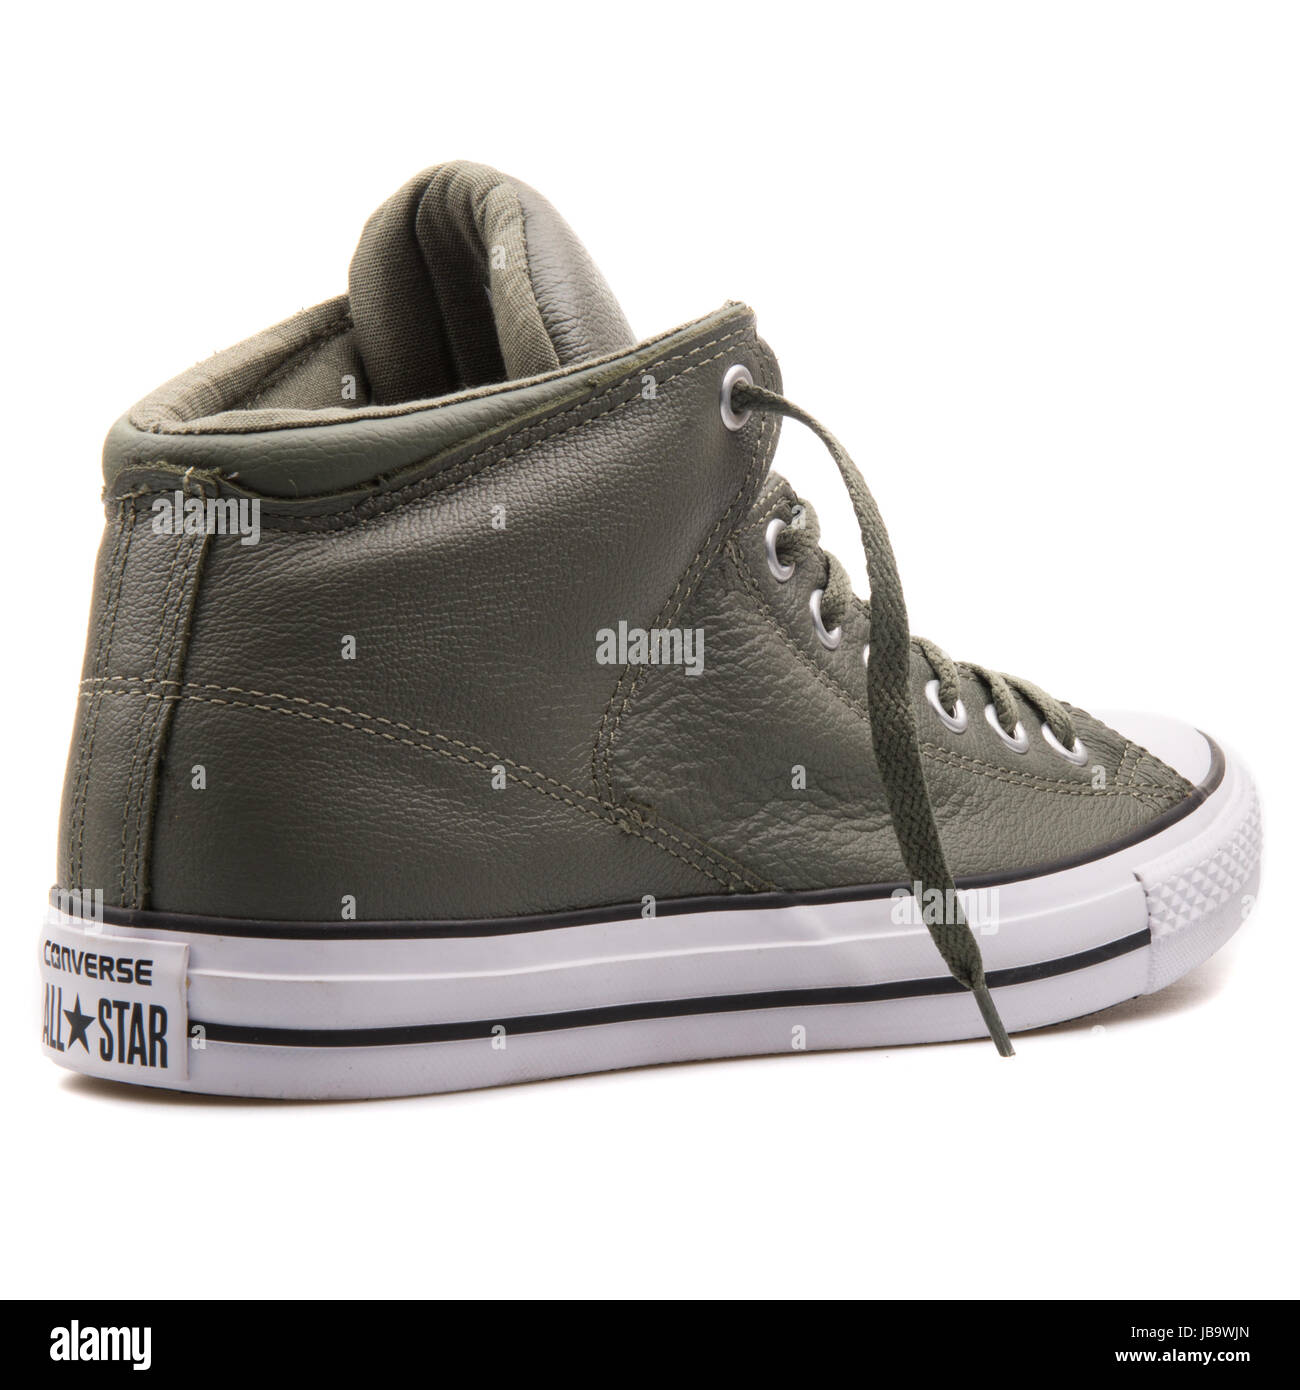 Converse Chuck Taylor All Star High Street Olive Submarine Unisex Shoes -  149427C Stock Photo - Alamy